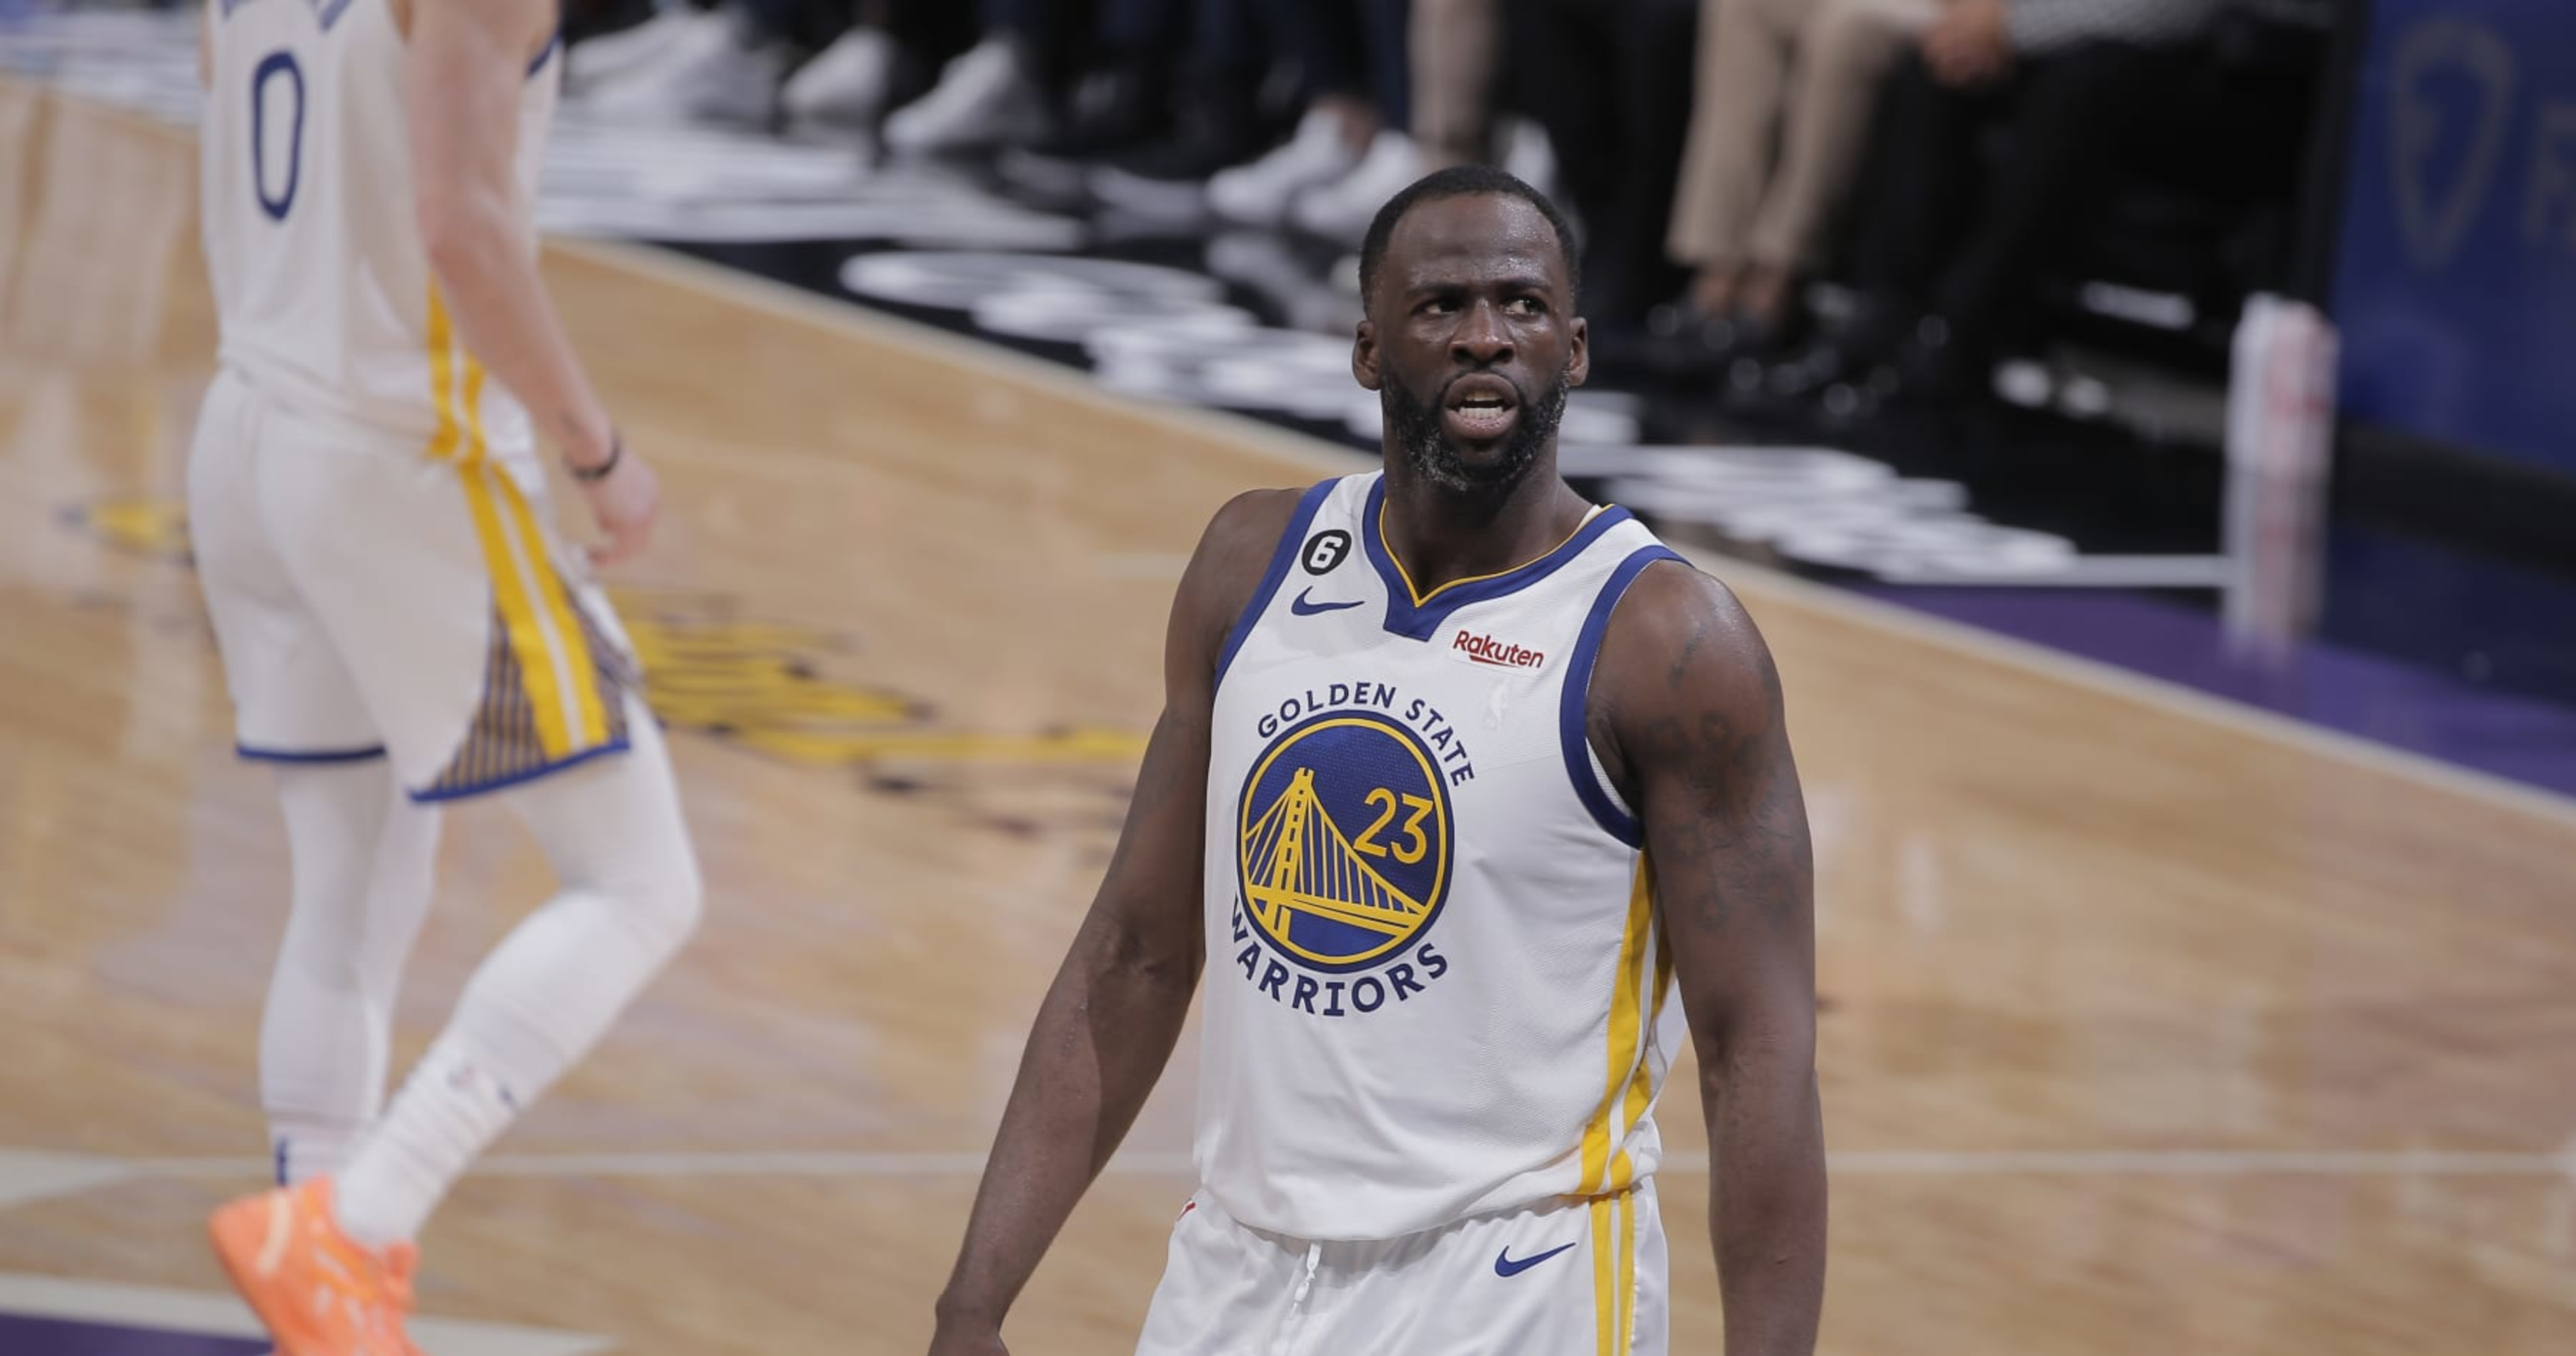 Draymond Green net worth 2022: What is Draymond's current contract?